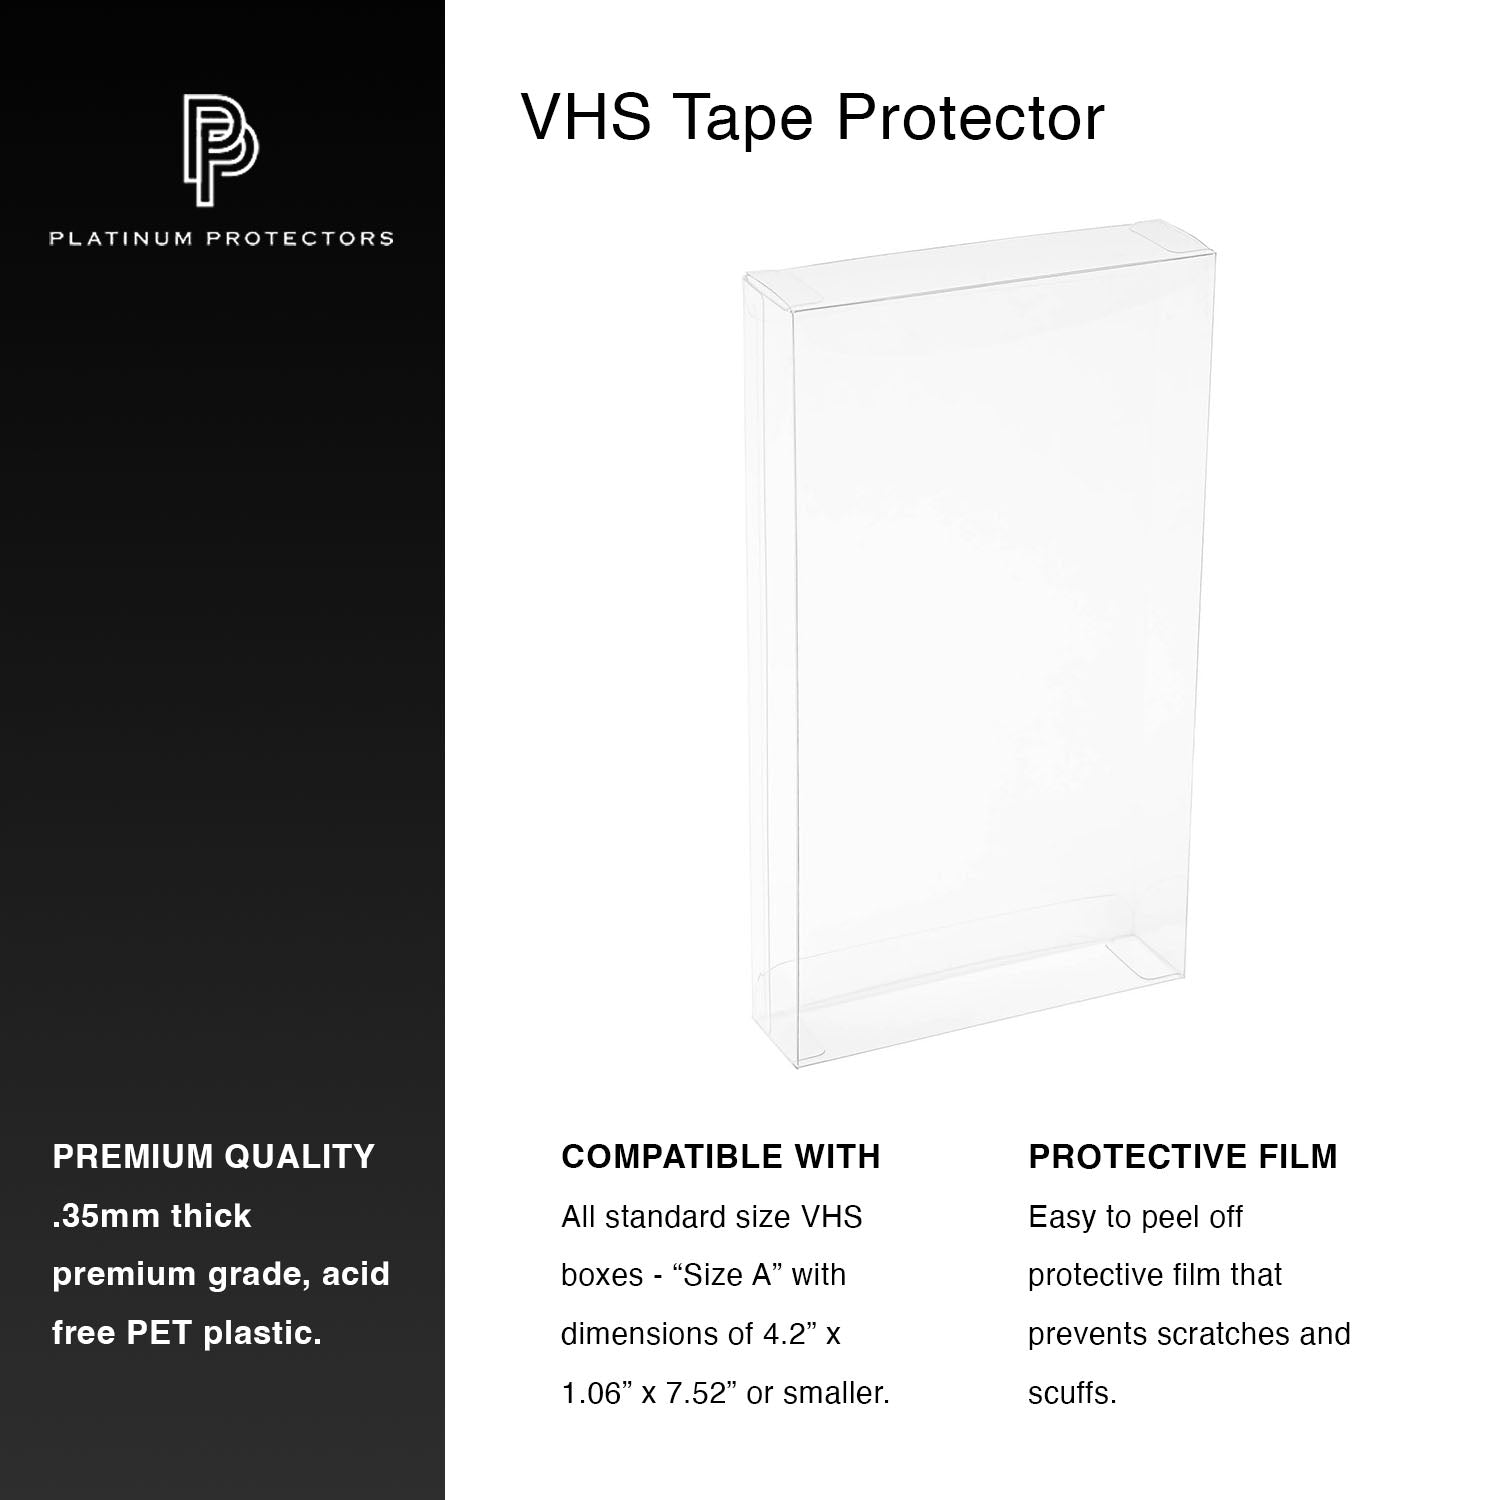 Platinum Protectors for VHS Tapes